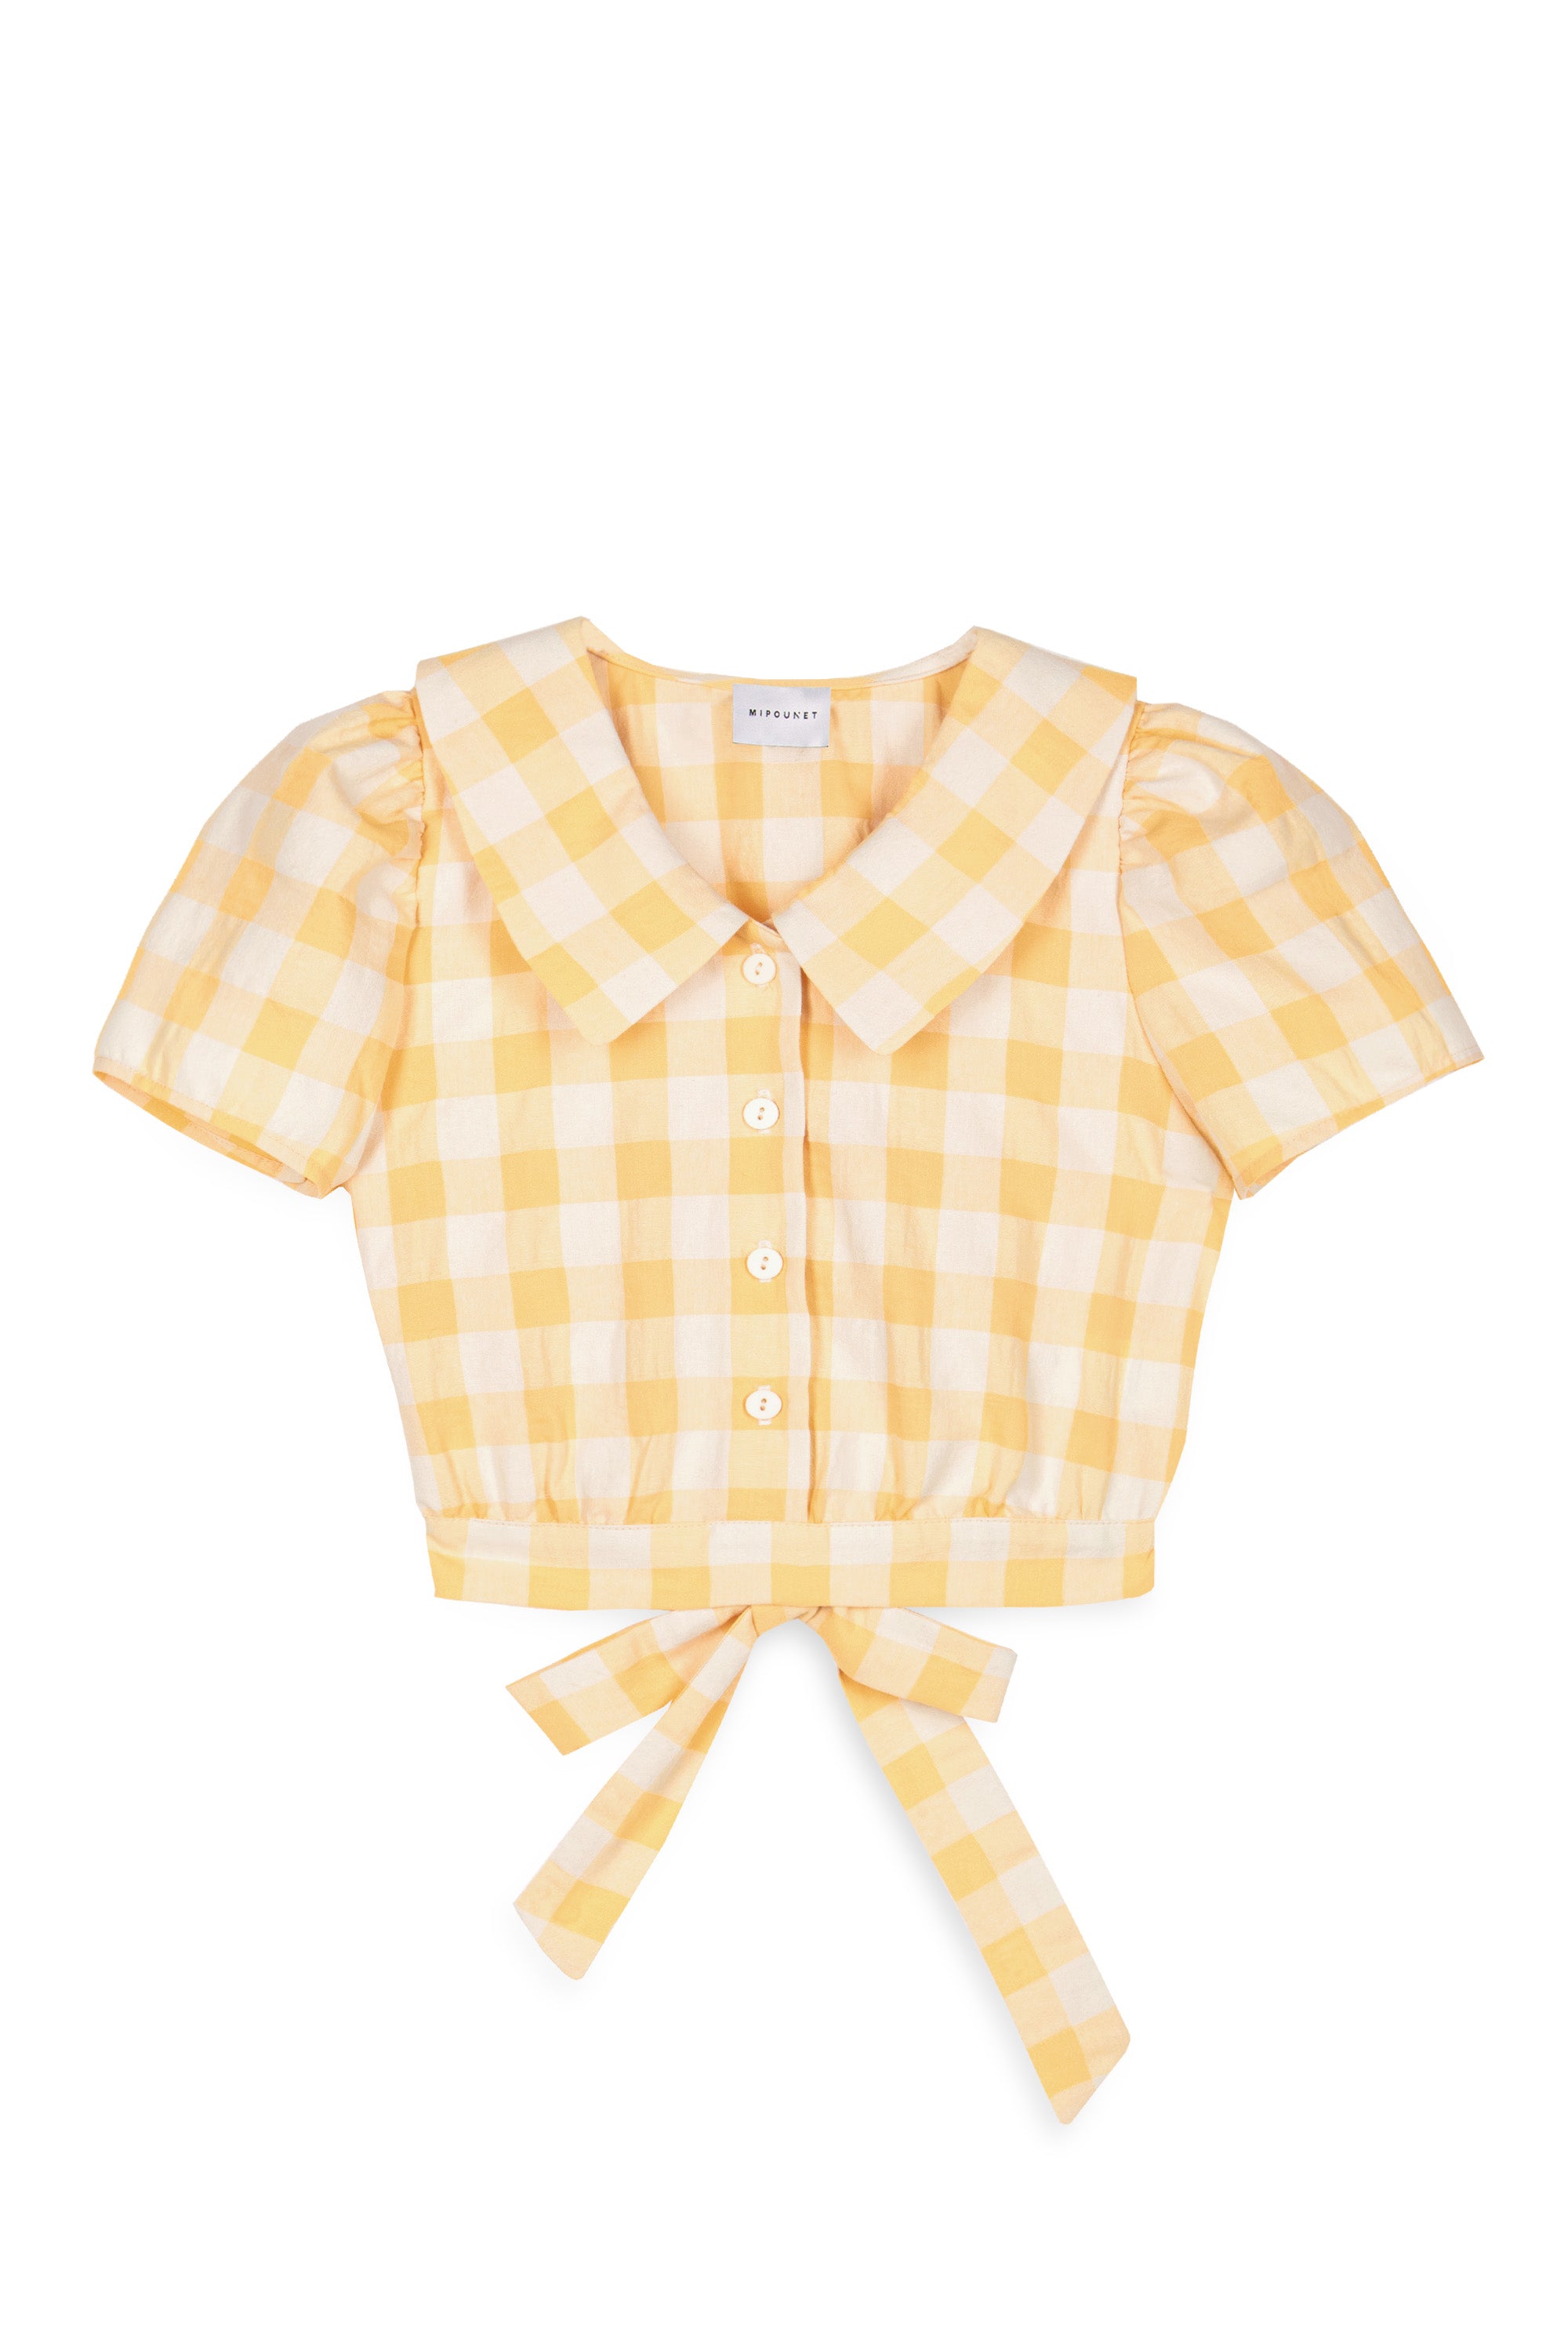 Mipounet - isabelle vichy top - yellow